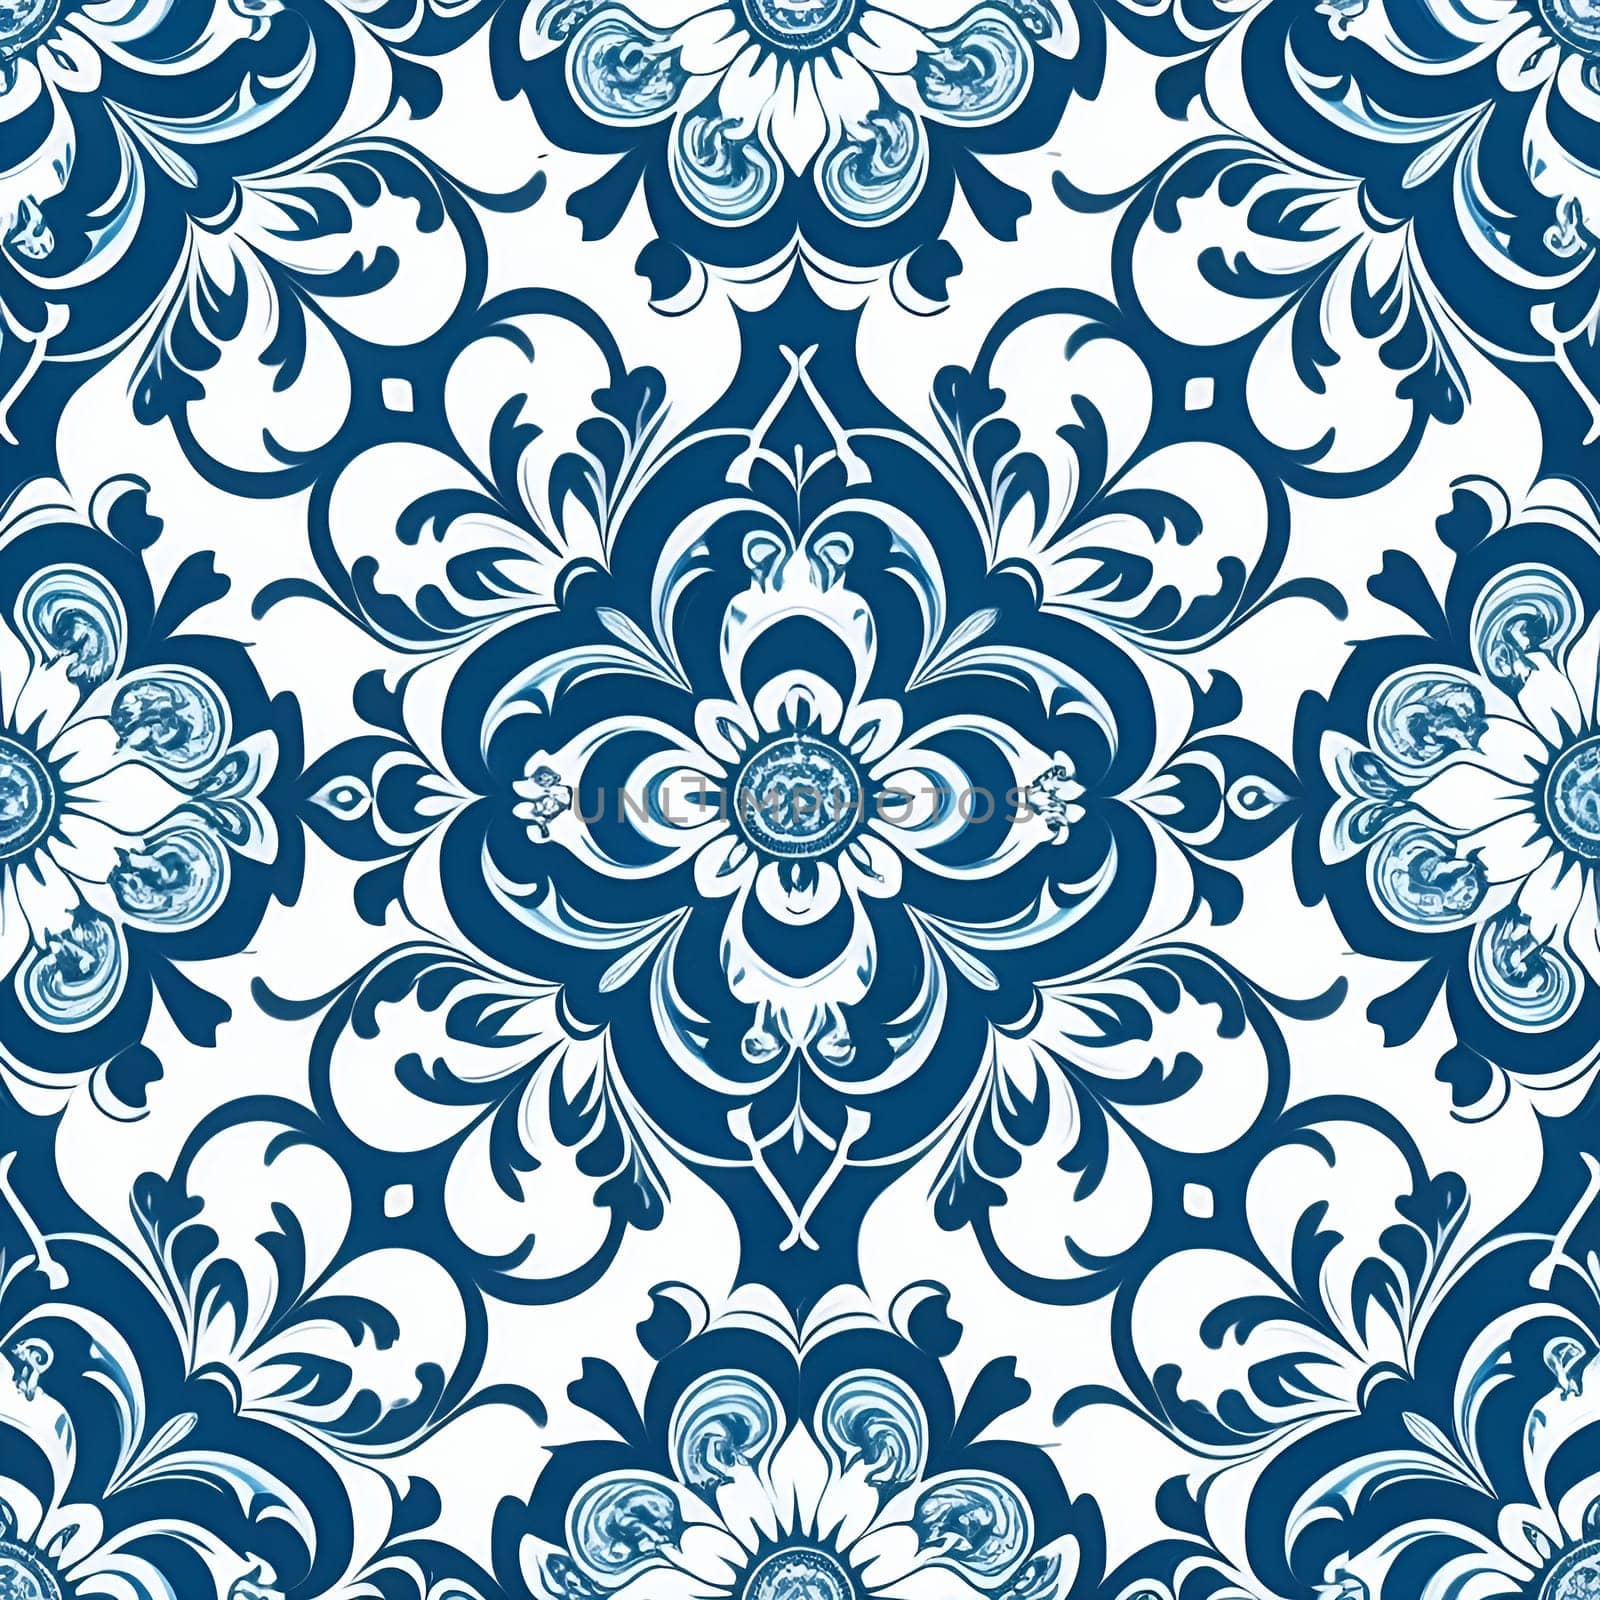 Blue and White Floral Pattern - Classic and Elegant by gallofoto